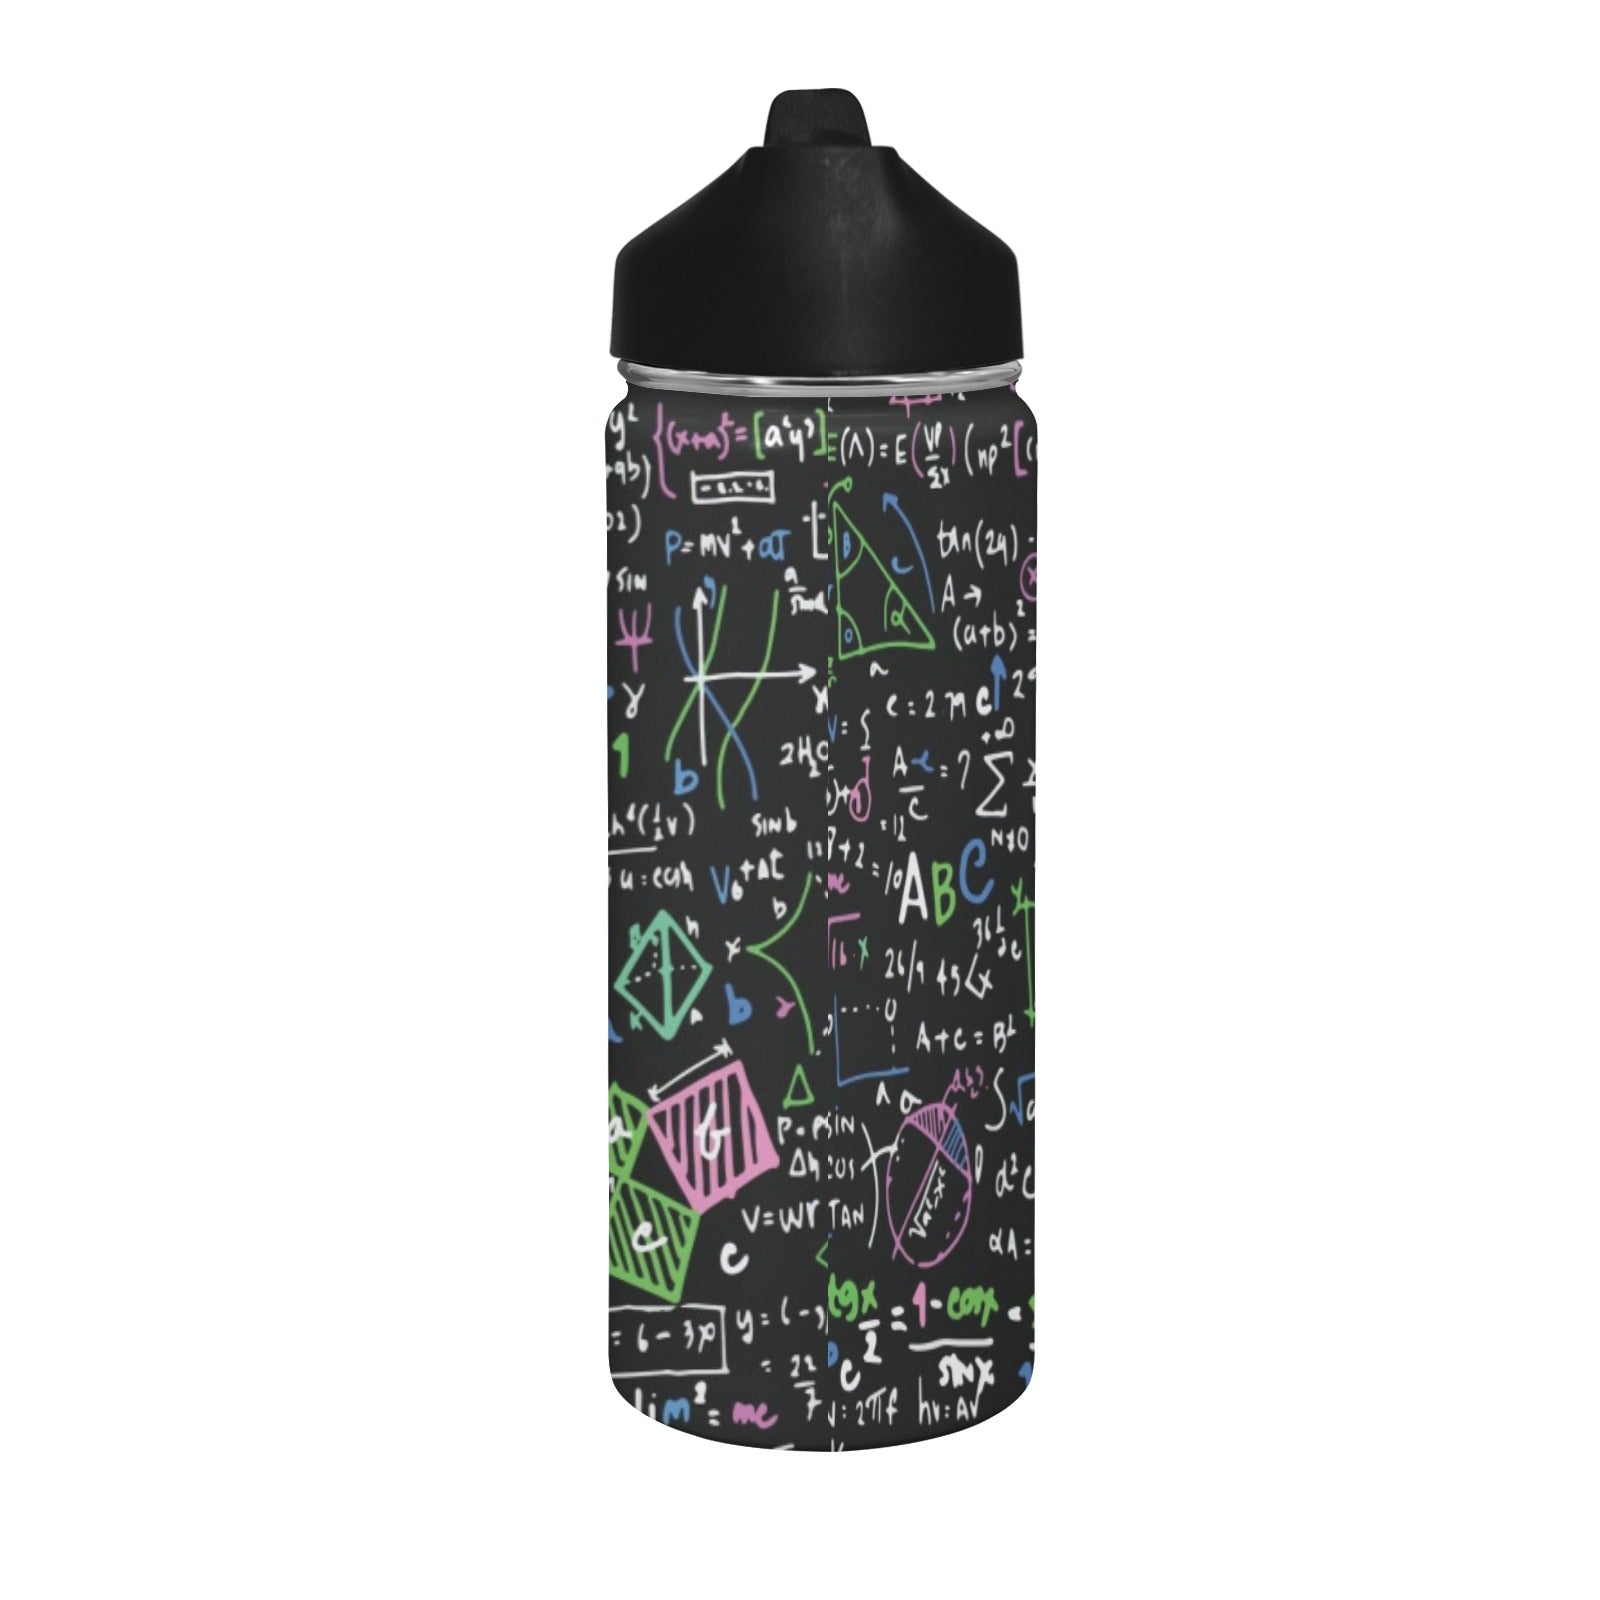 Equations In Green And Pink - Insulated Water Bottle with Straw Lid (18 oz) Insulated Water Bottle with Straw Lid